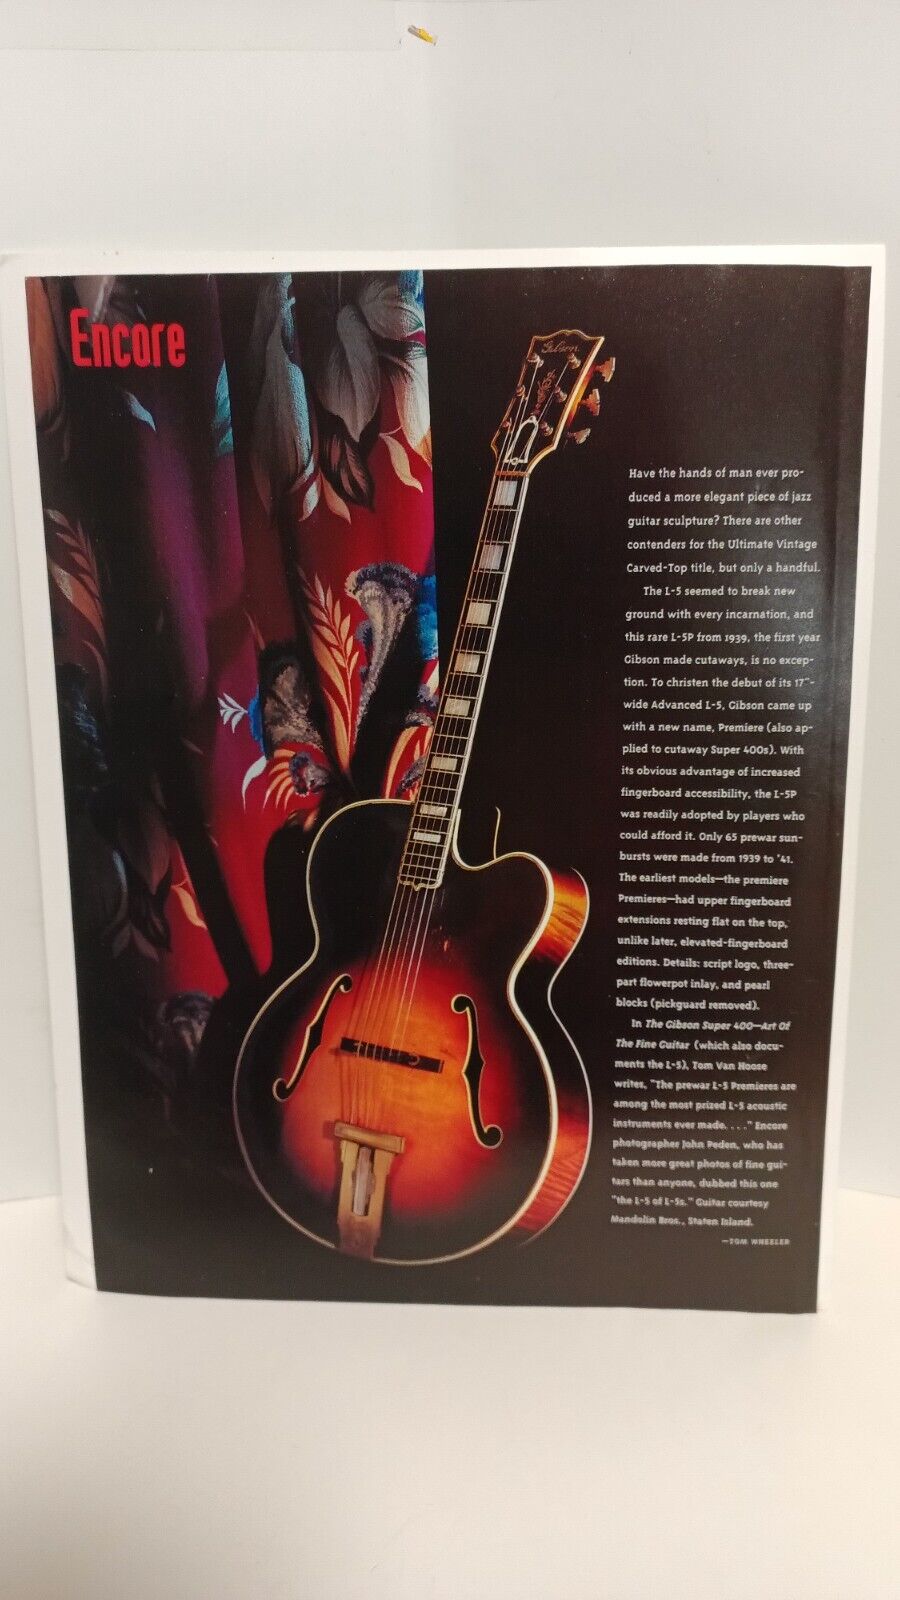 GIBSON L-5 GUITAR - ENCORE FEATURE PAGE -  , 11X8.5 - PRINT AD. x3